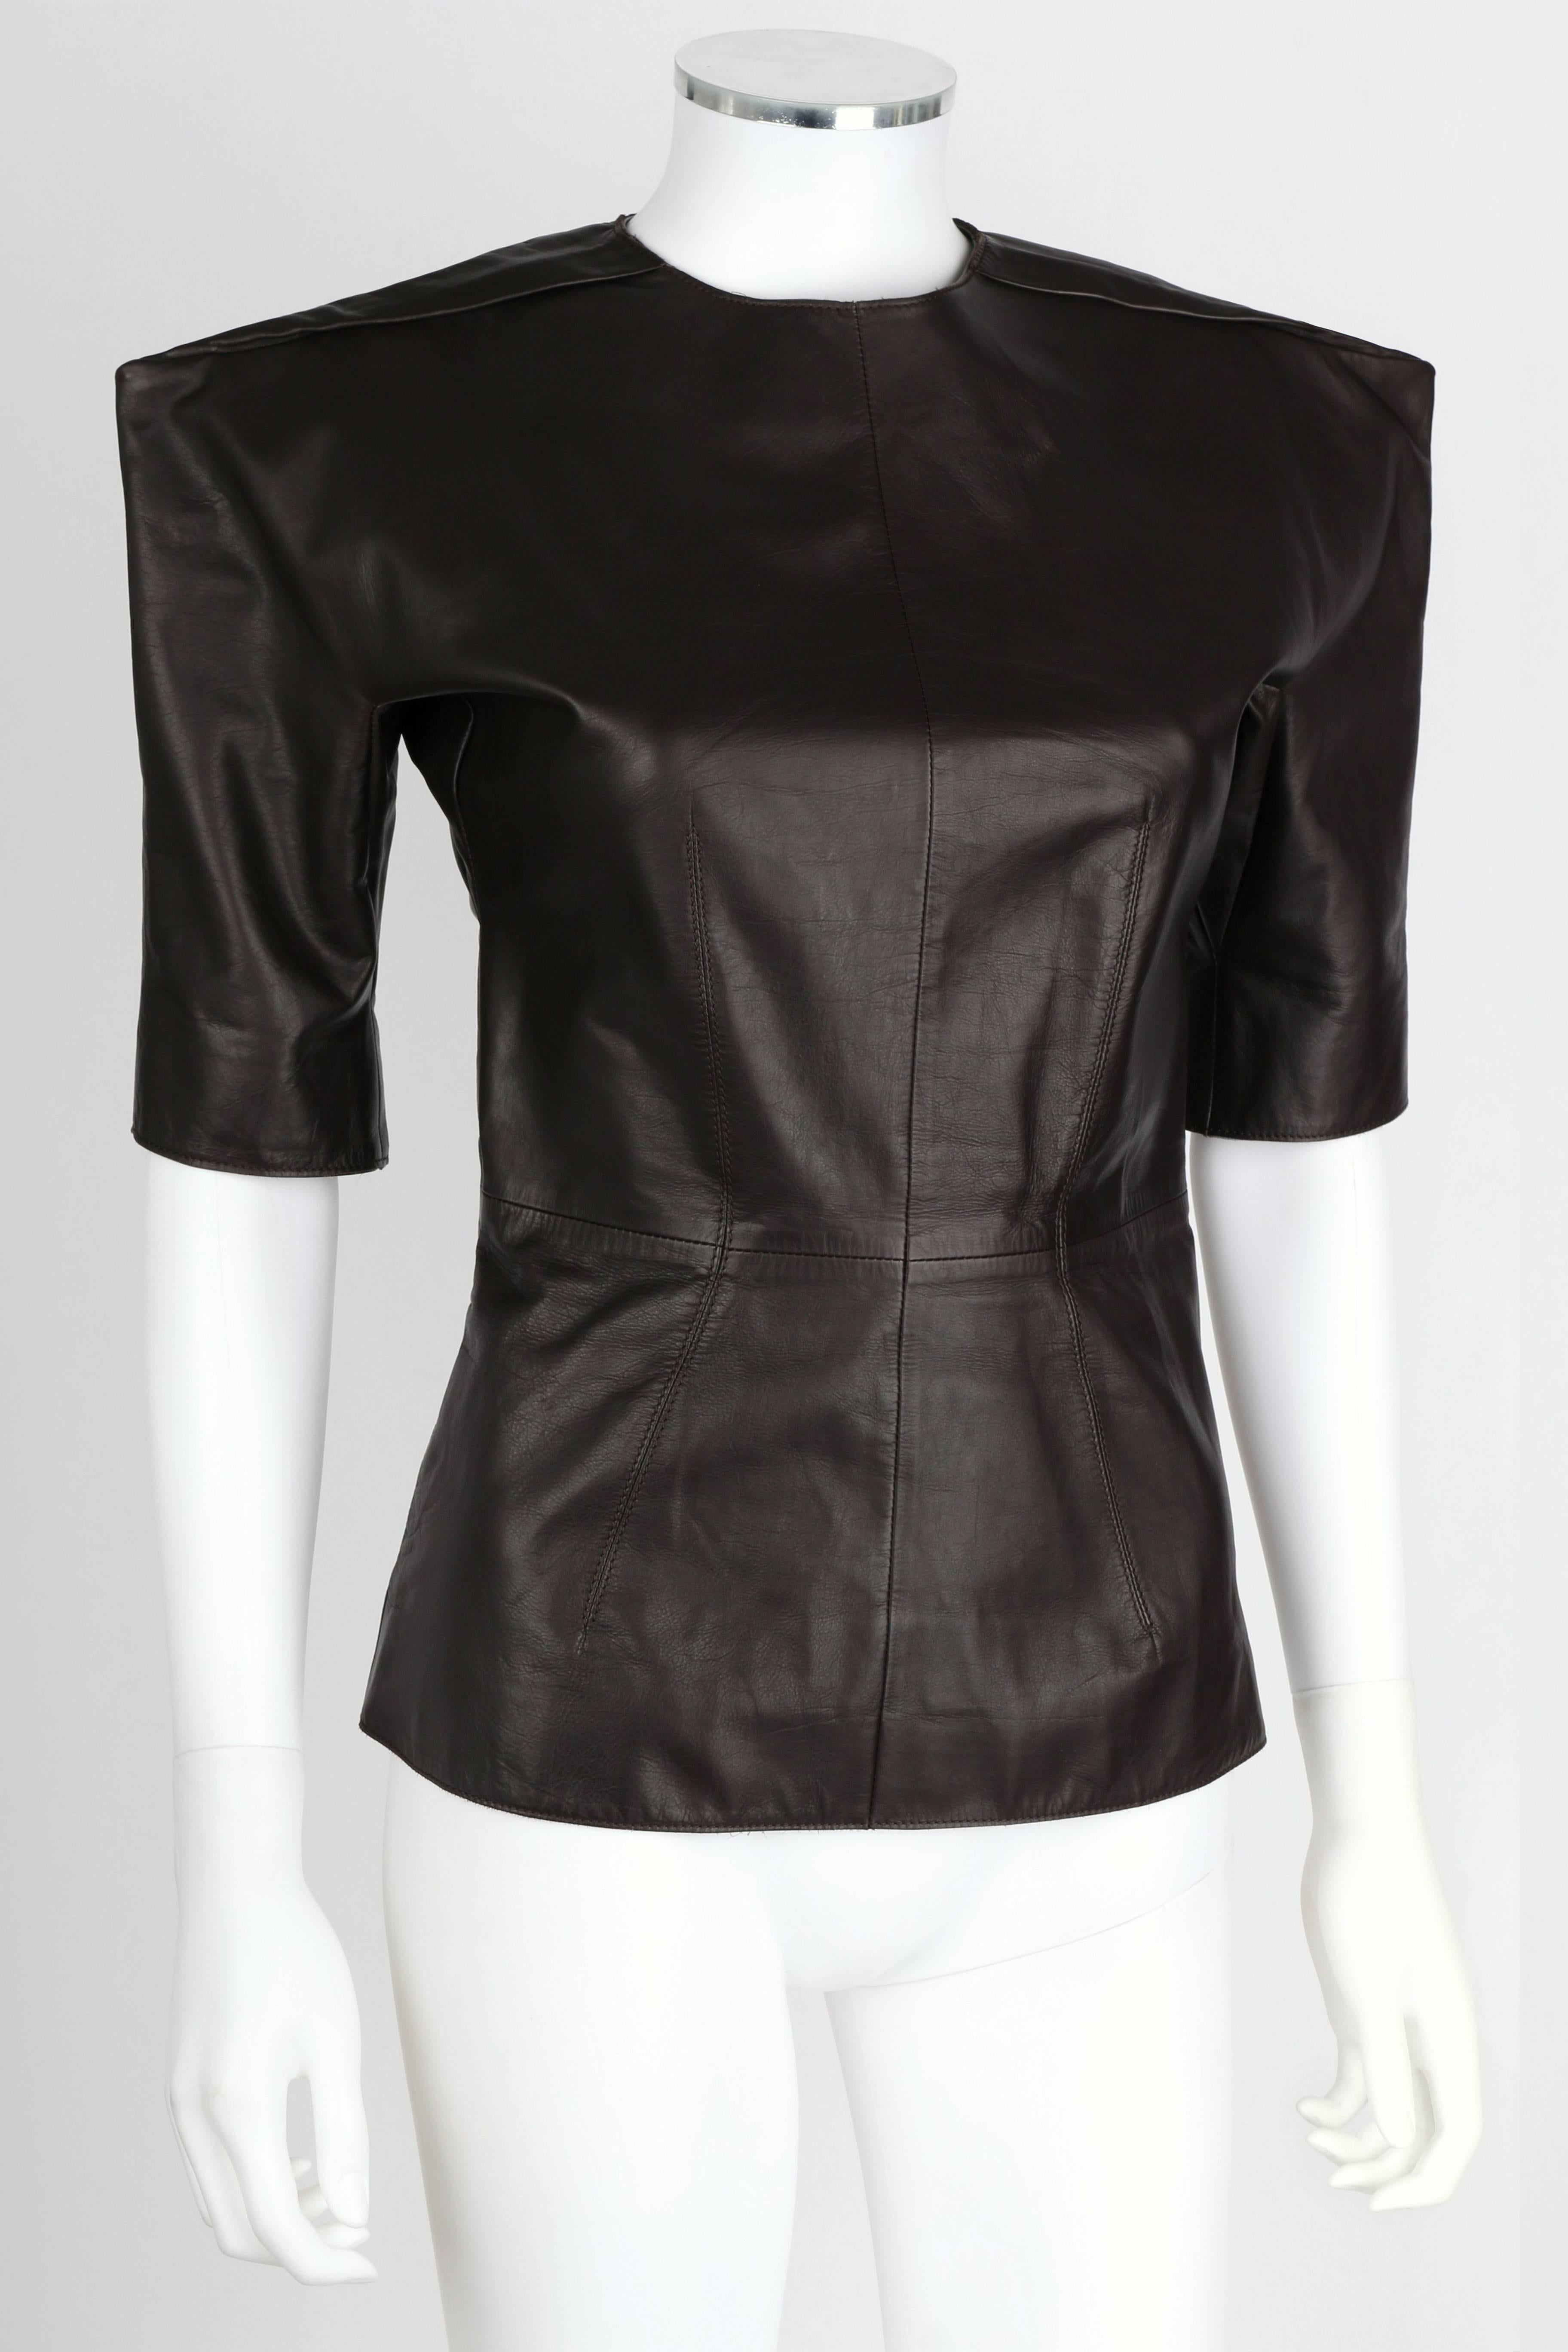 Lanvin F/W 2010 runway dark brown calf leather top. Exaggerated, structured shoulders. Mid-length sleeves. Tonal stitching and silk lining. Waistline darts. Two way separating zipper in back. Black ribbon separating tape. Marked Fabric Content: